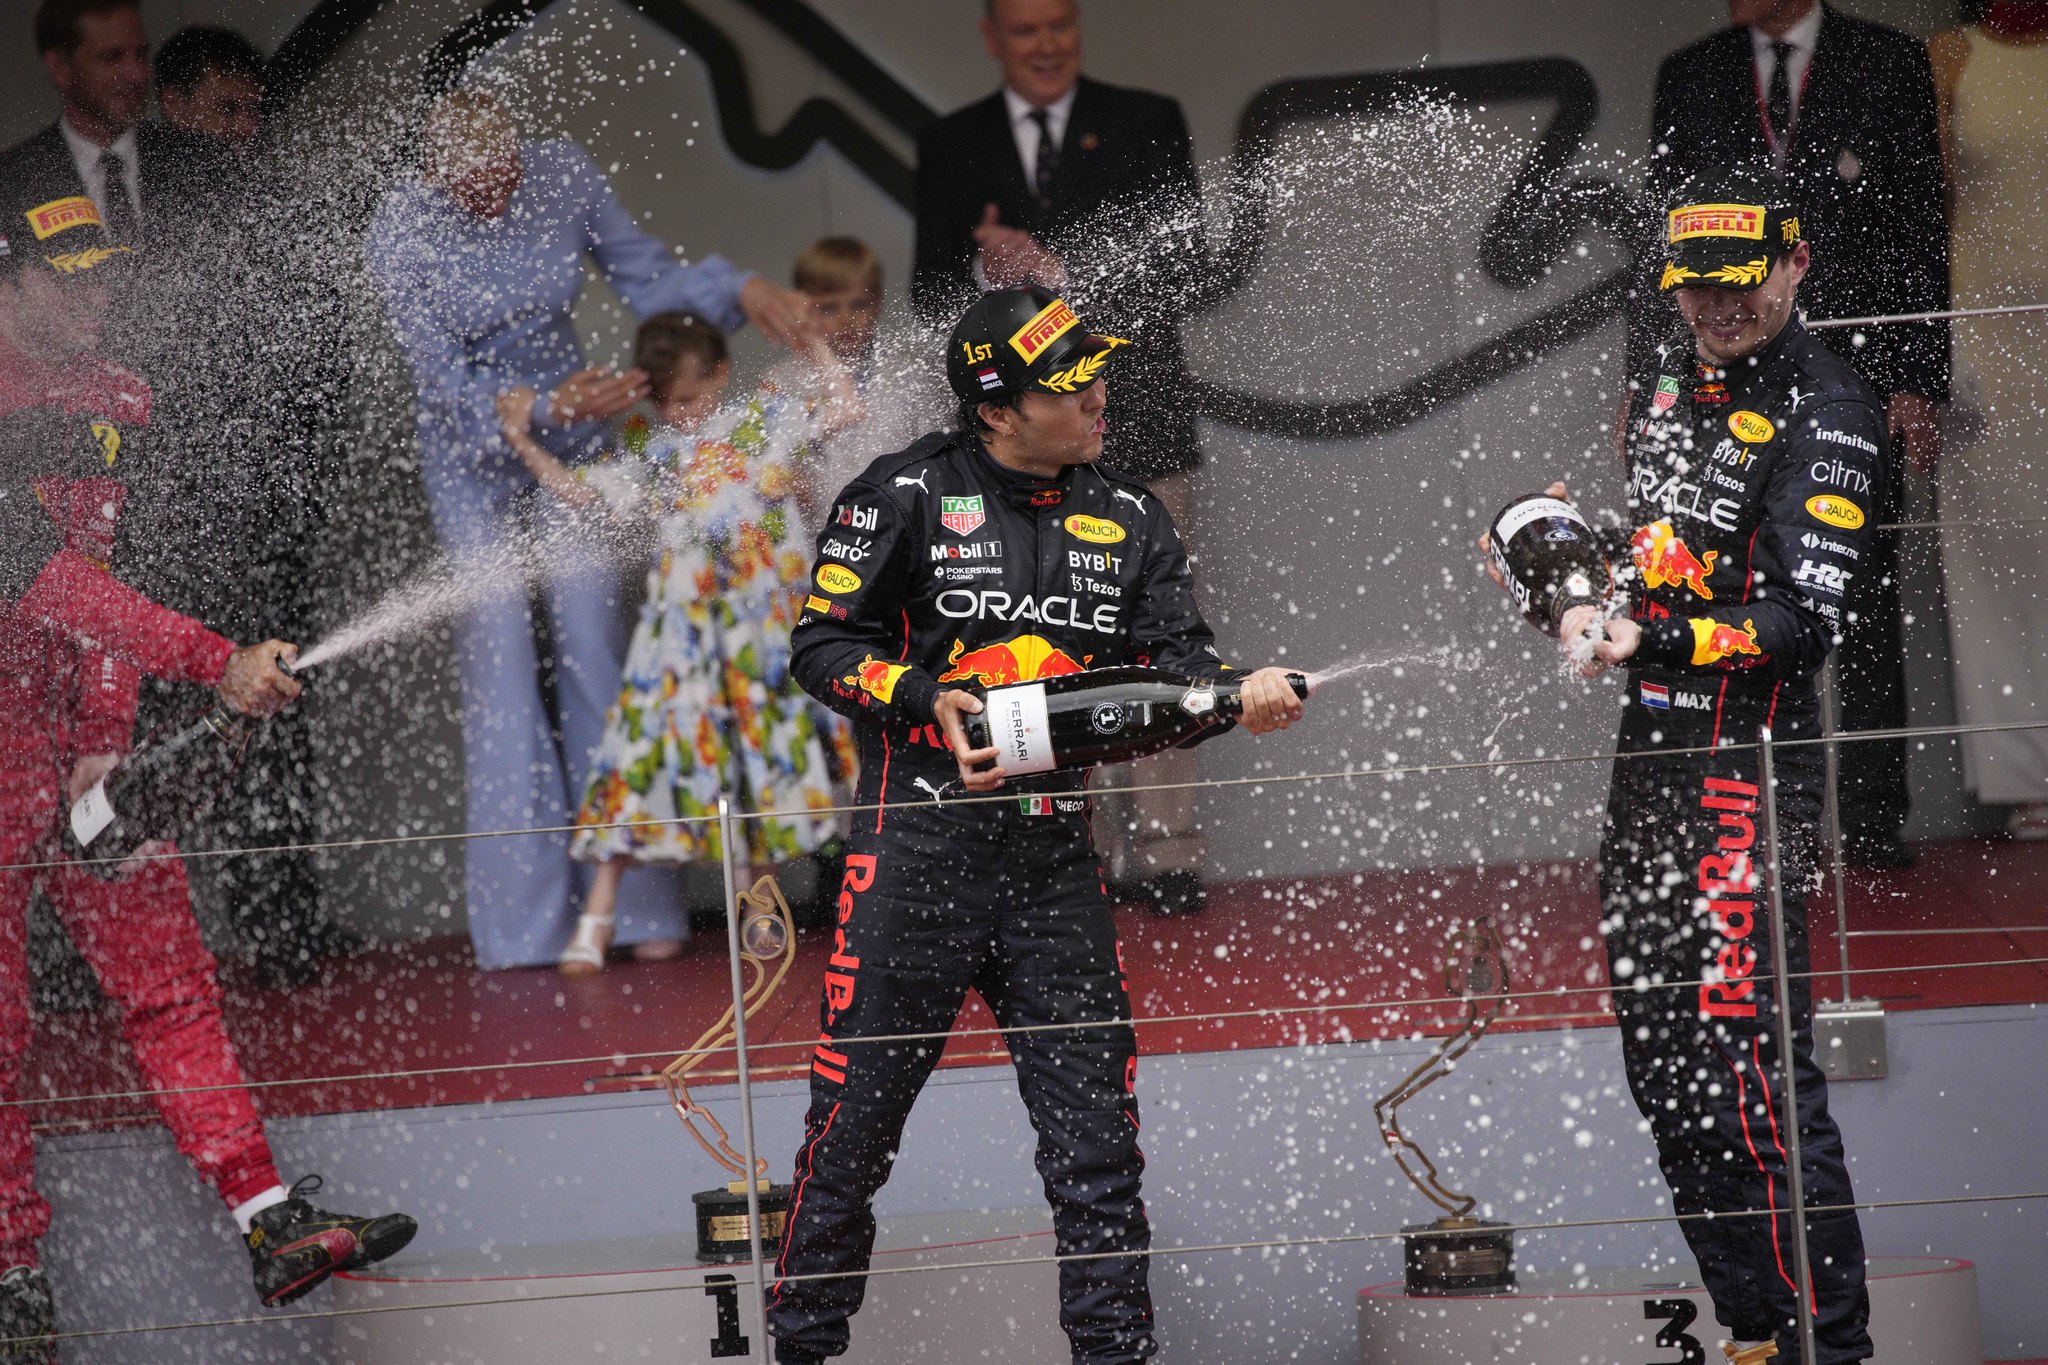 Winner Red Bull driver Sergio Perez of Mexico, center, sprays champagne to his teammate third placed Red Bull driver Max Verstappen and Ferrari driver Carlos lt;HIT gt;Sainz lt;/HIT gt; of Spain on the podium of the Monaco Formula One Grand Prix, at the Monaco racetrack, in Monaco, Sunday, May 29, 2022. (AP Photo/Daniel Cole)